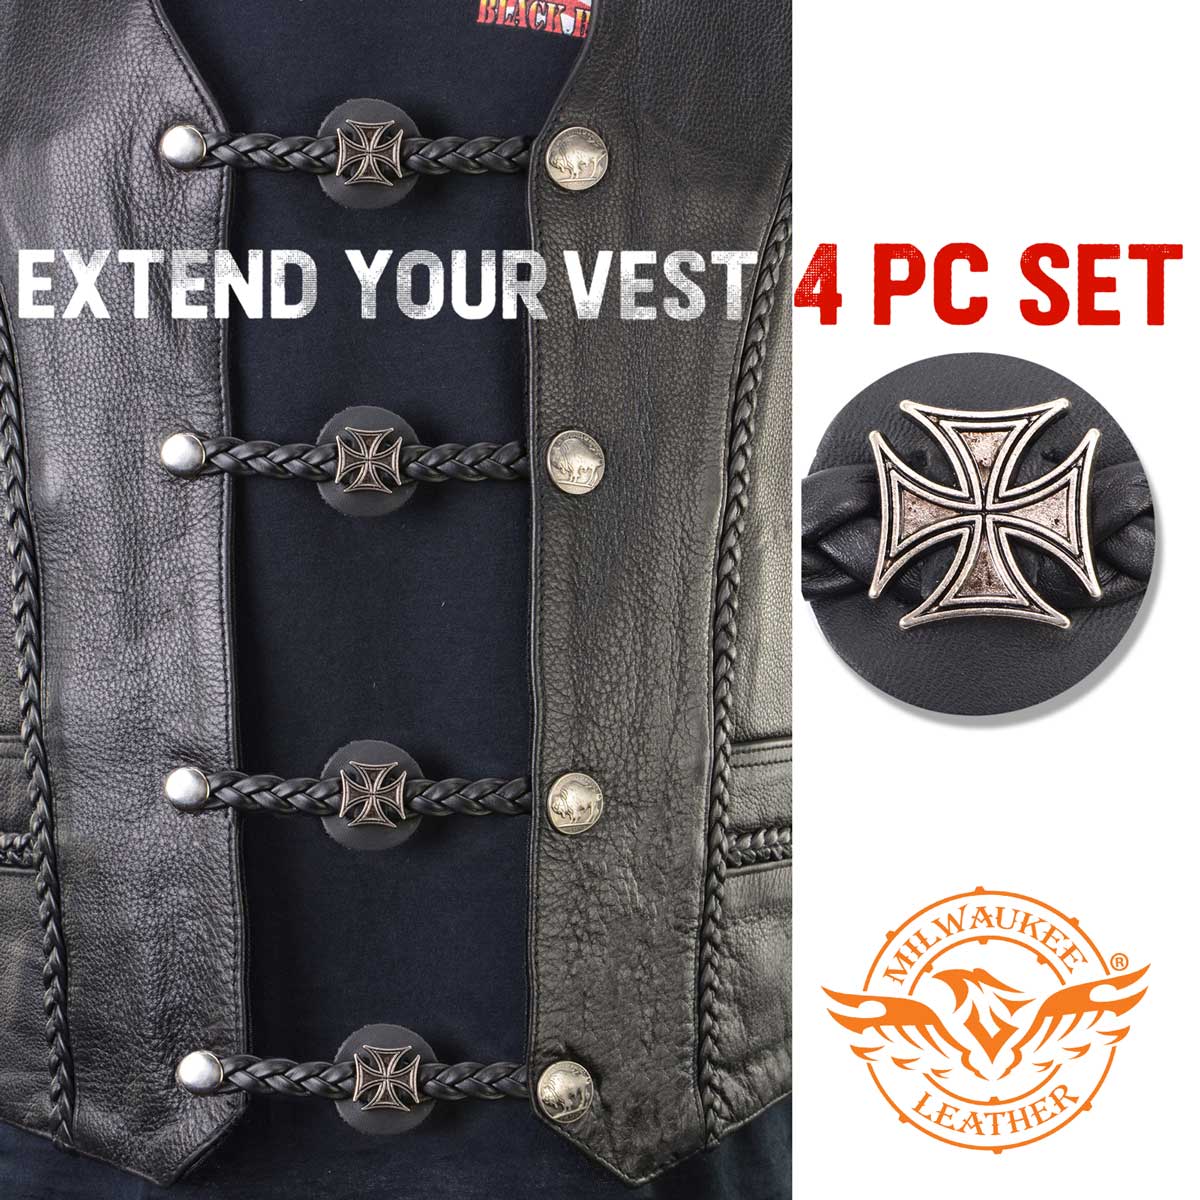 Milwaukee Leather MLA6063SET Iron Cross 4-PCS Vest Extender Double Chrome Chains w/ Genuine Braided Leather 4" Extension